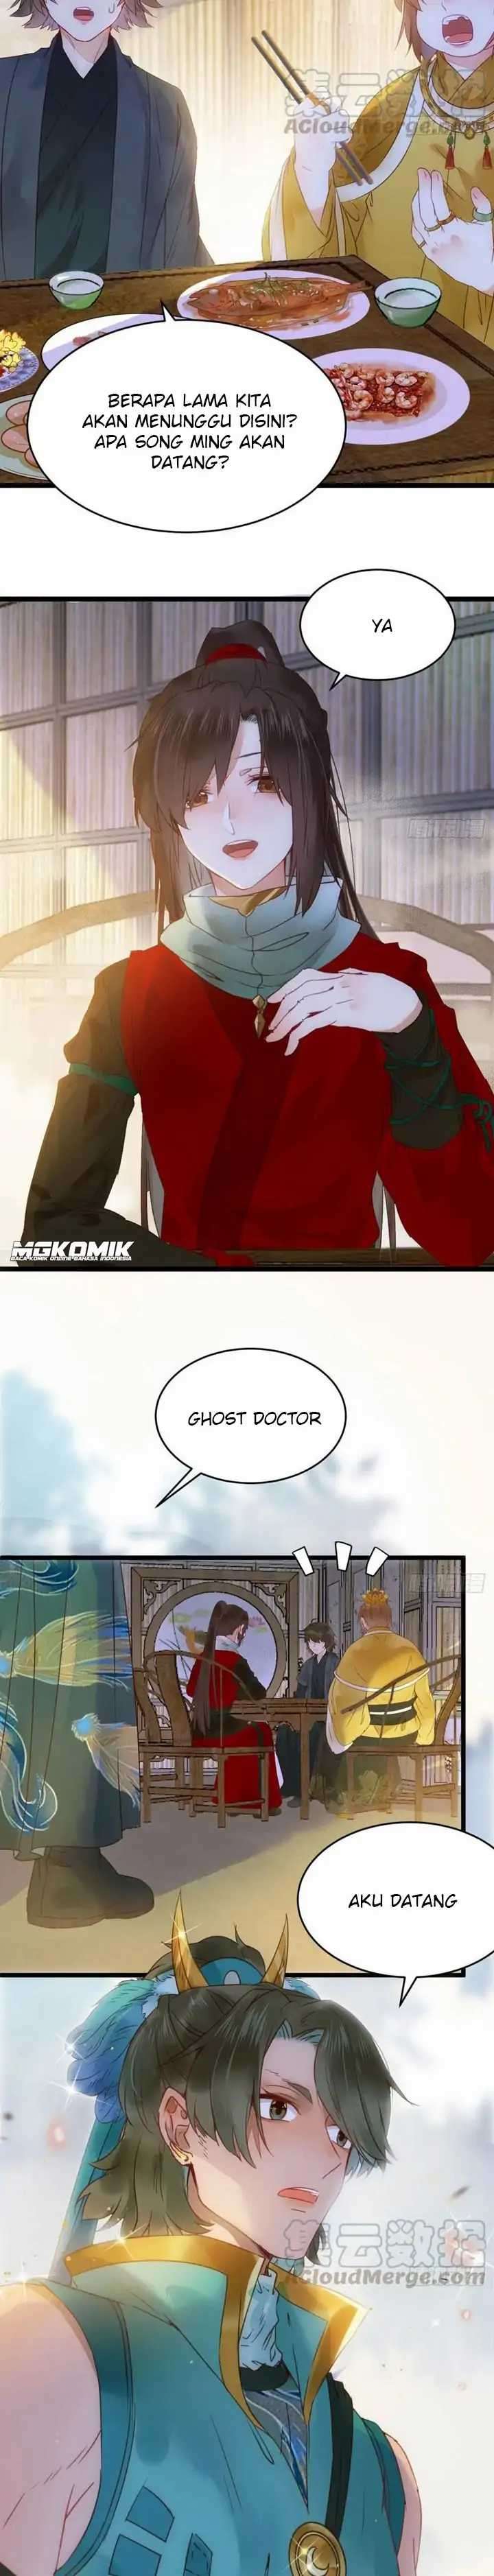 The Ghostly Doctor Chapter 376 9